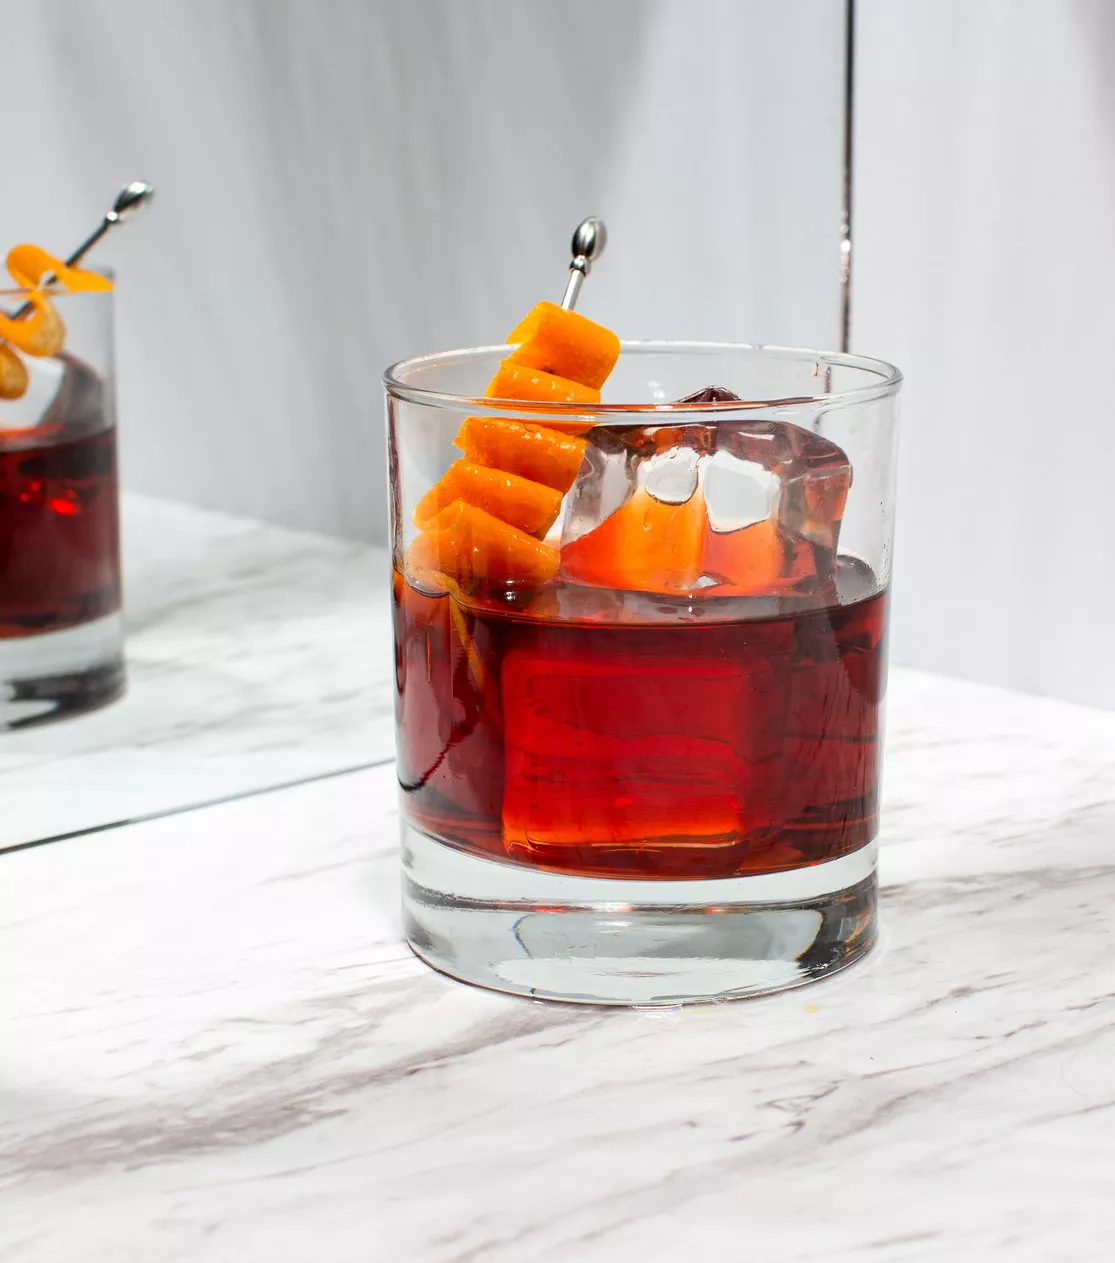 The Pisco Negroni cocktail